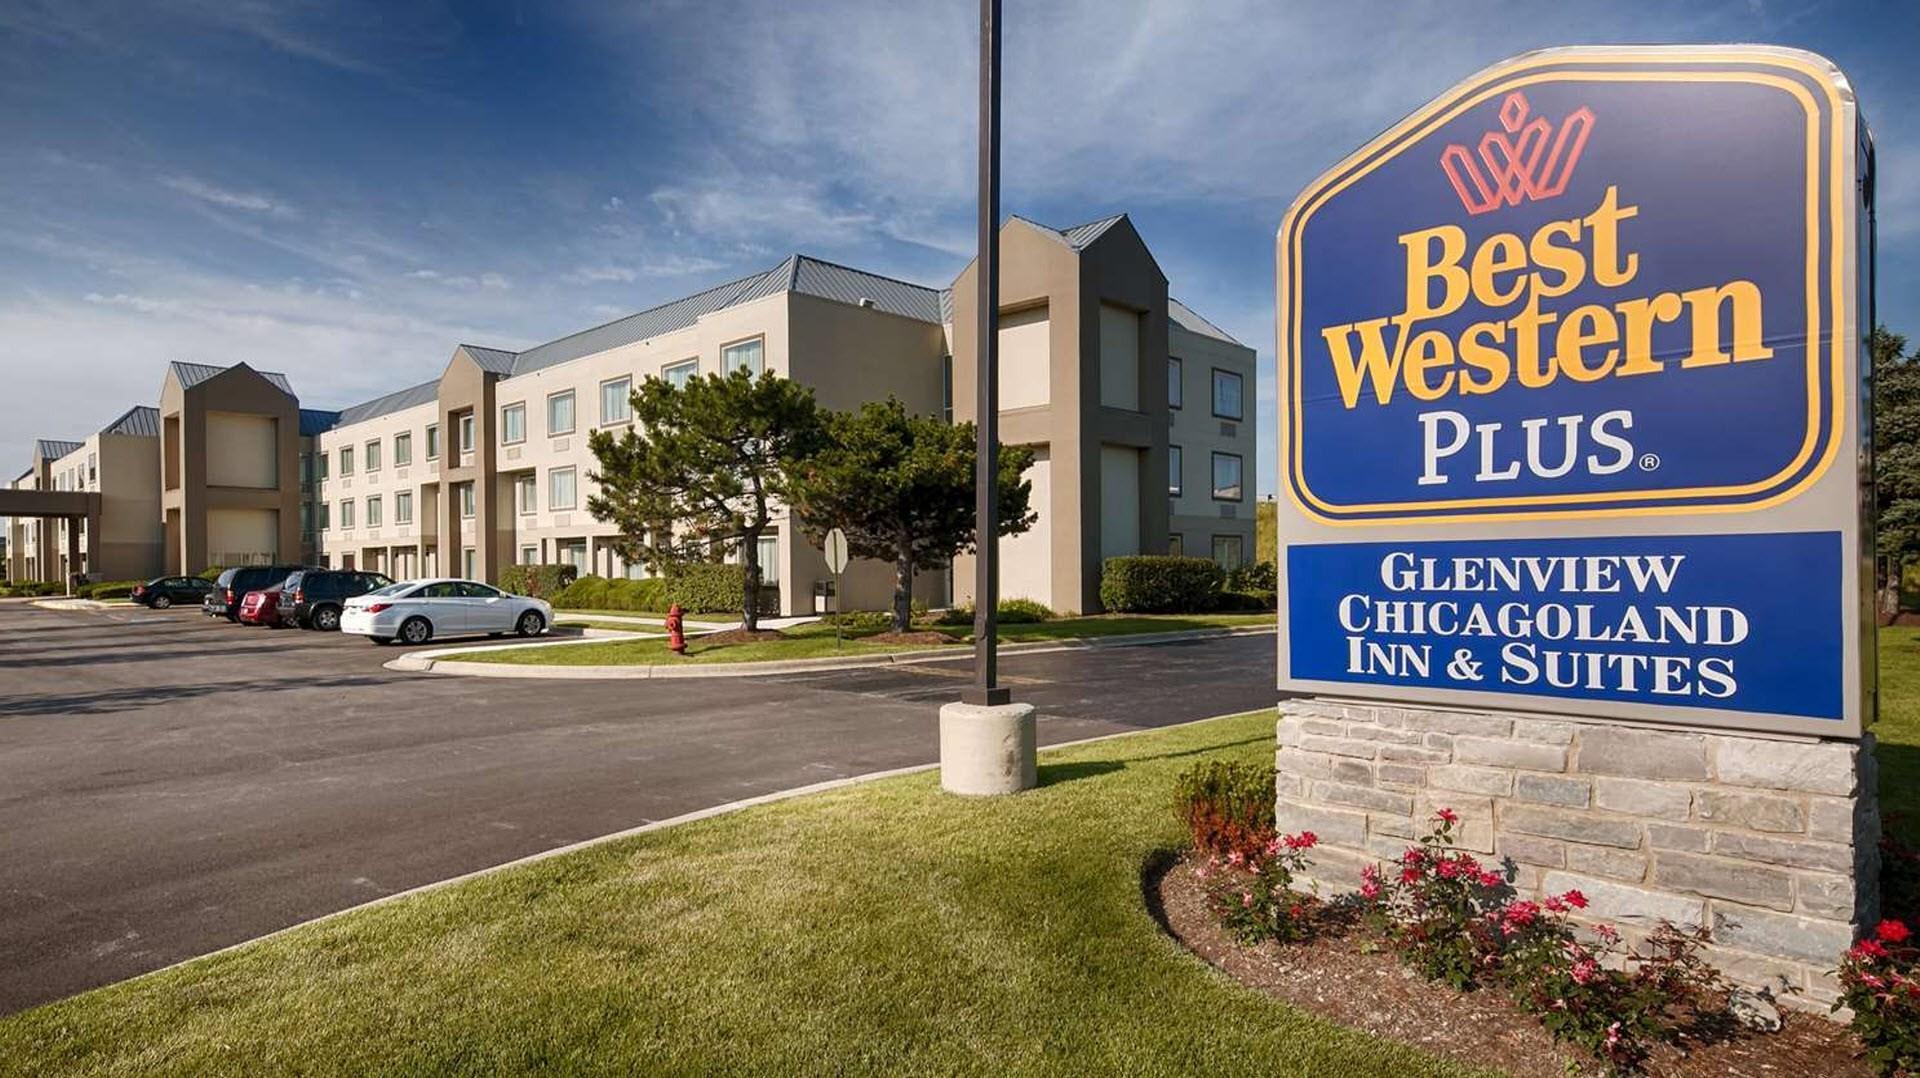 Best Western Plus Glenview Chicagoland Inn & Suites in Glenview, IL